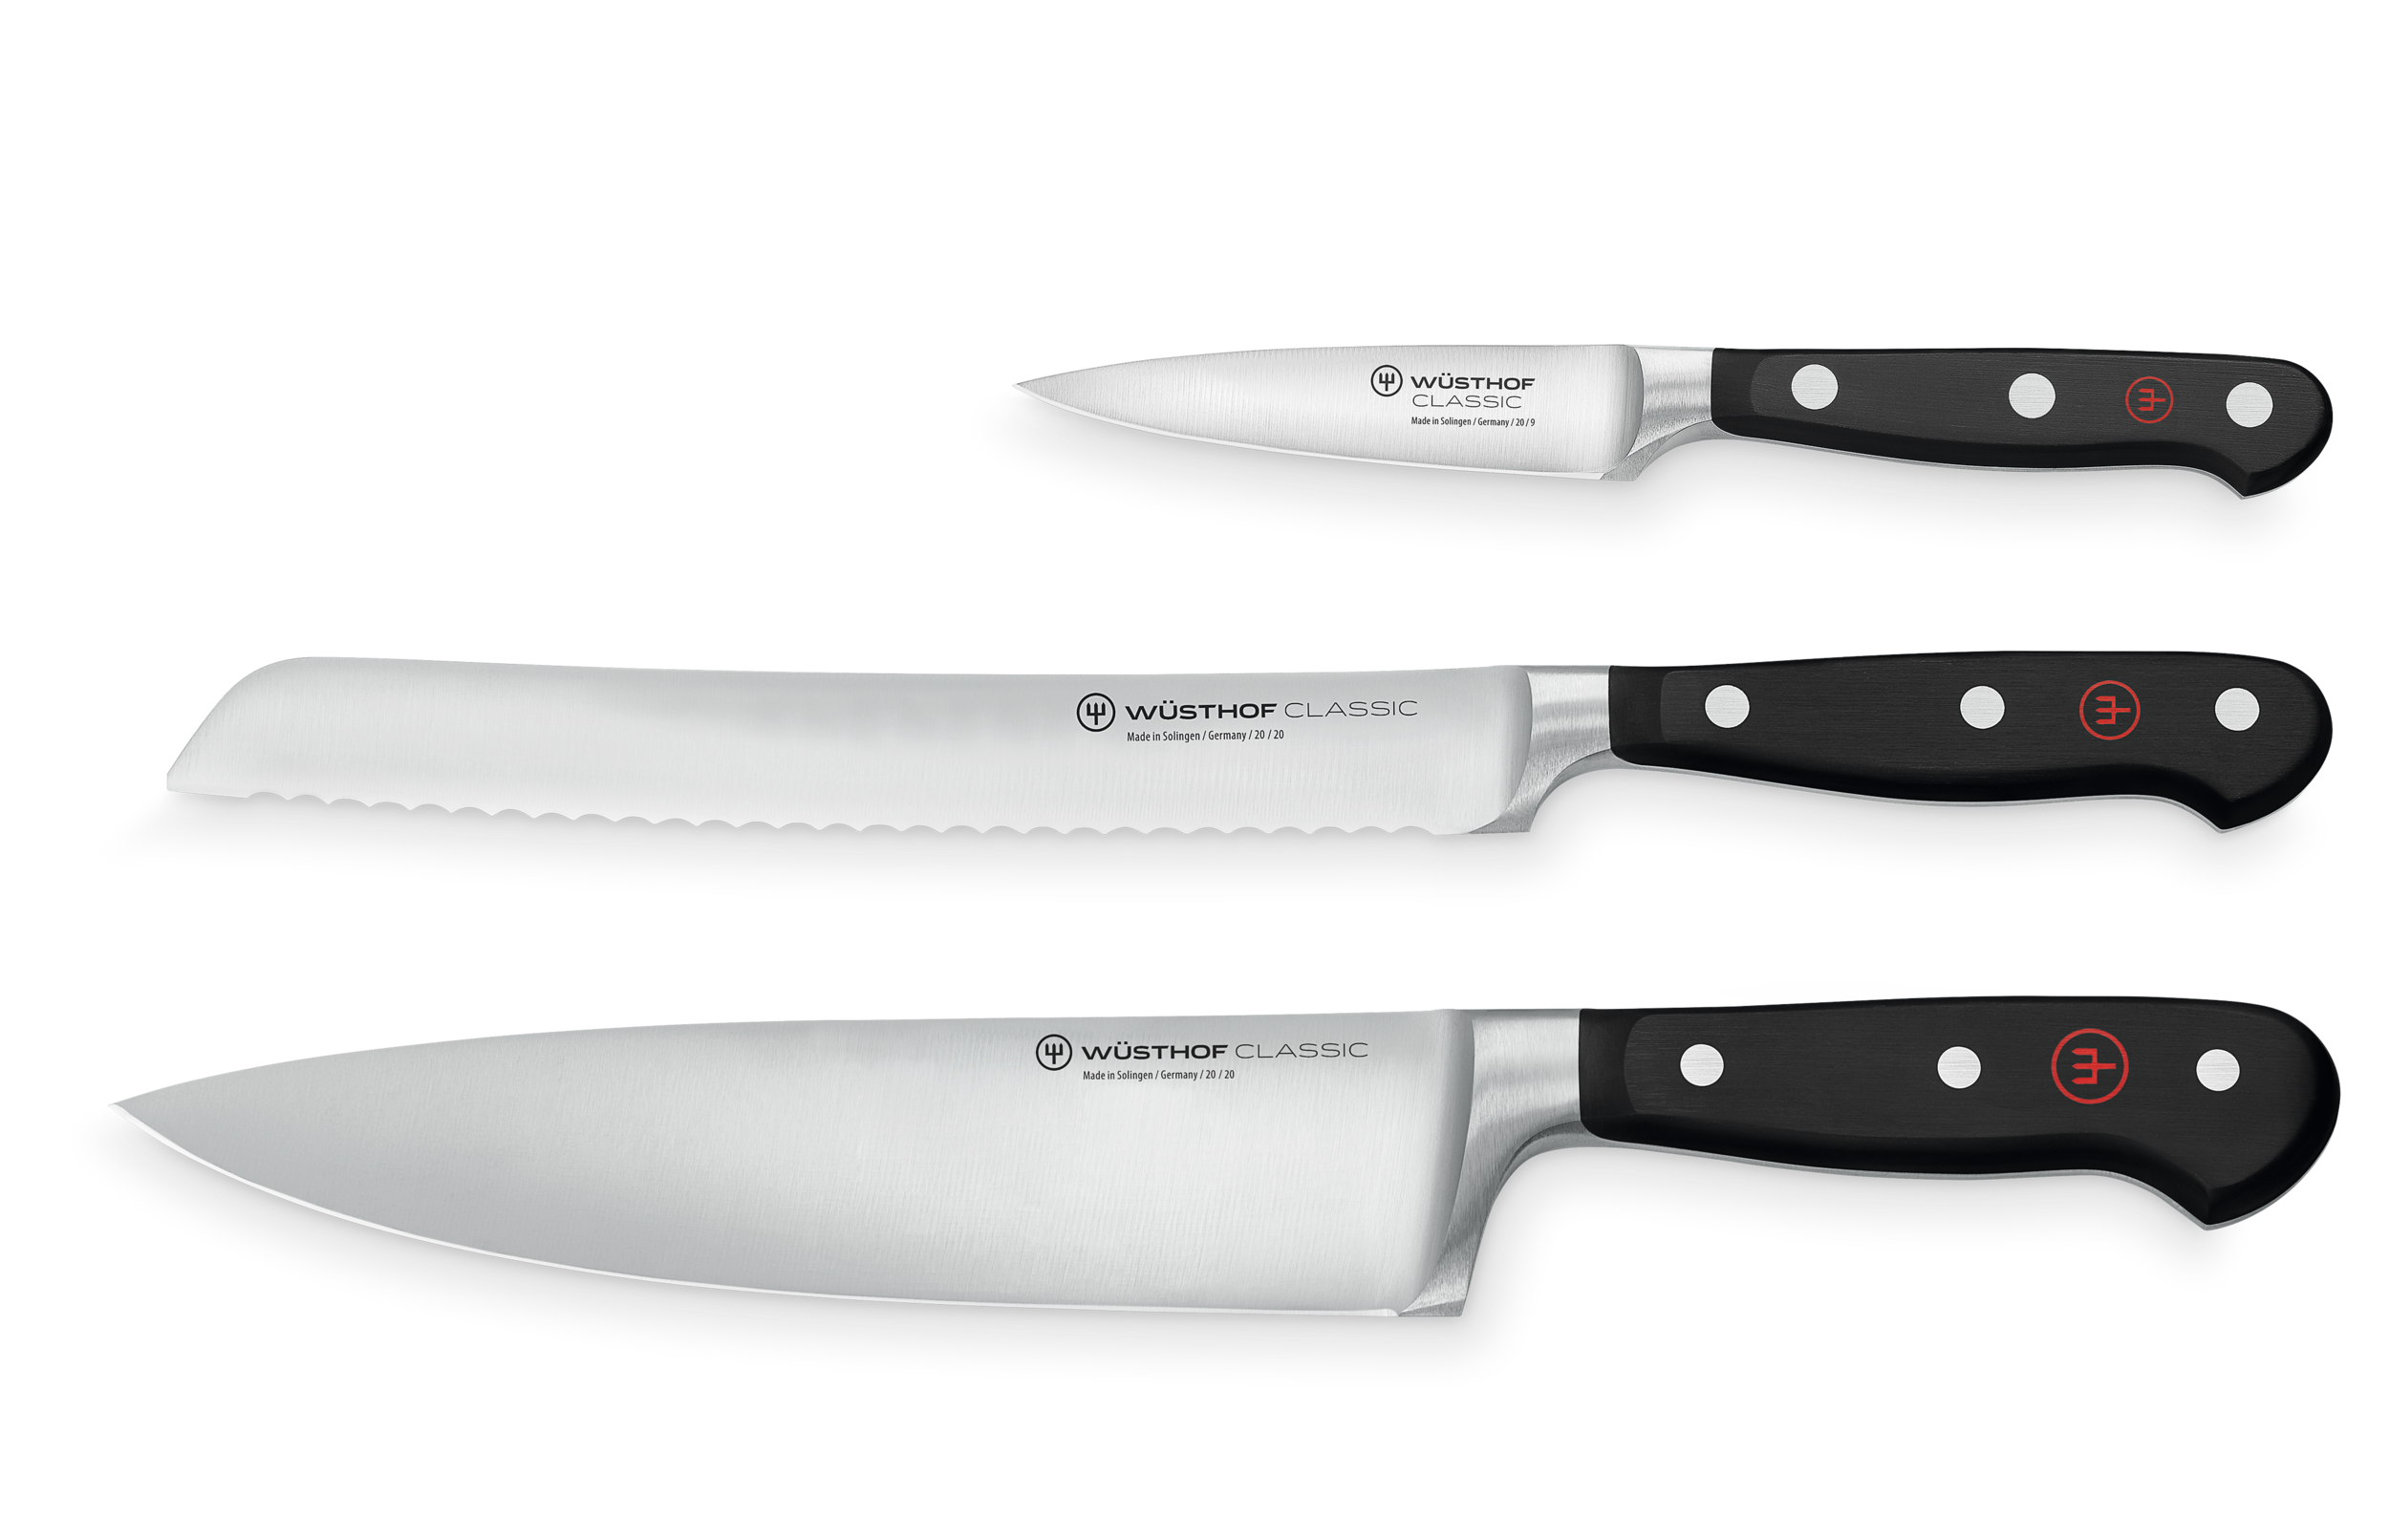 The Most Popular Knife and 3 Most Needed Knives in the Kitchen